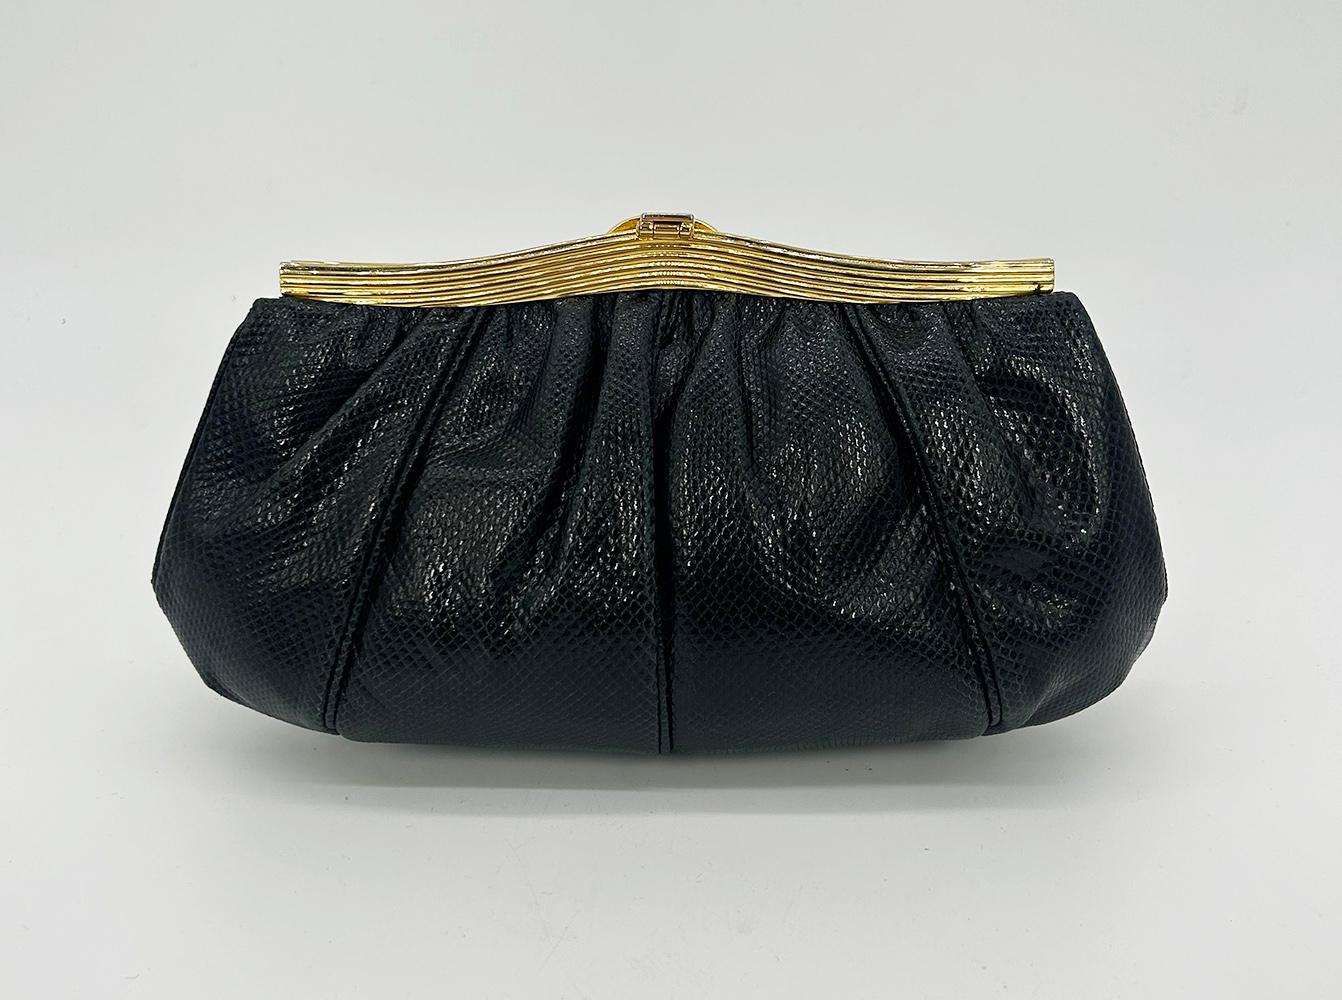 Judith Leiber Black Lizard Lion Head Clutch in very good condition. Black pleated lizard leather exterior trimmed with gold hardware and unique lion head embossed center detail. Lift latch top center closure opens to a black satin lined interior